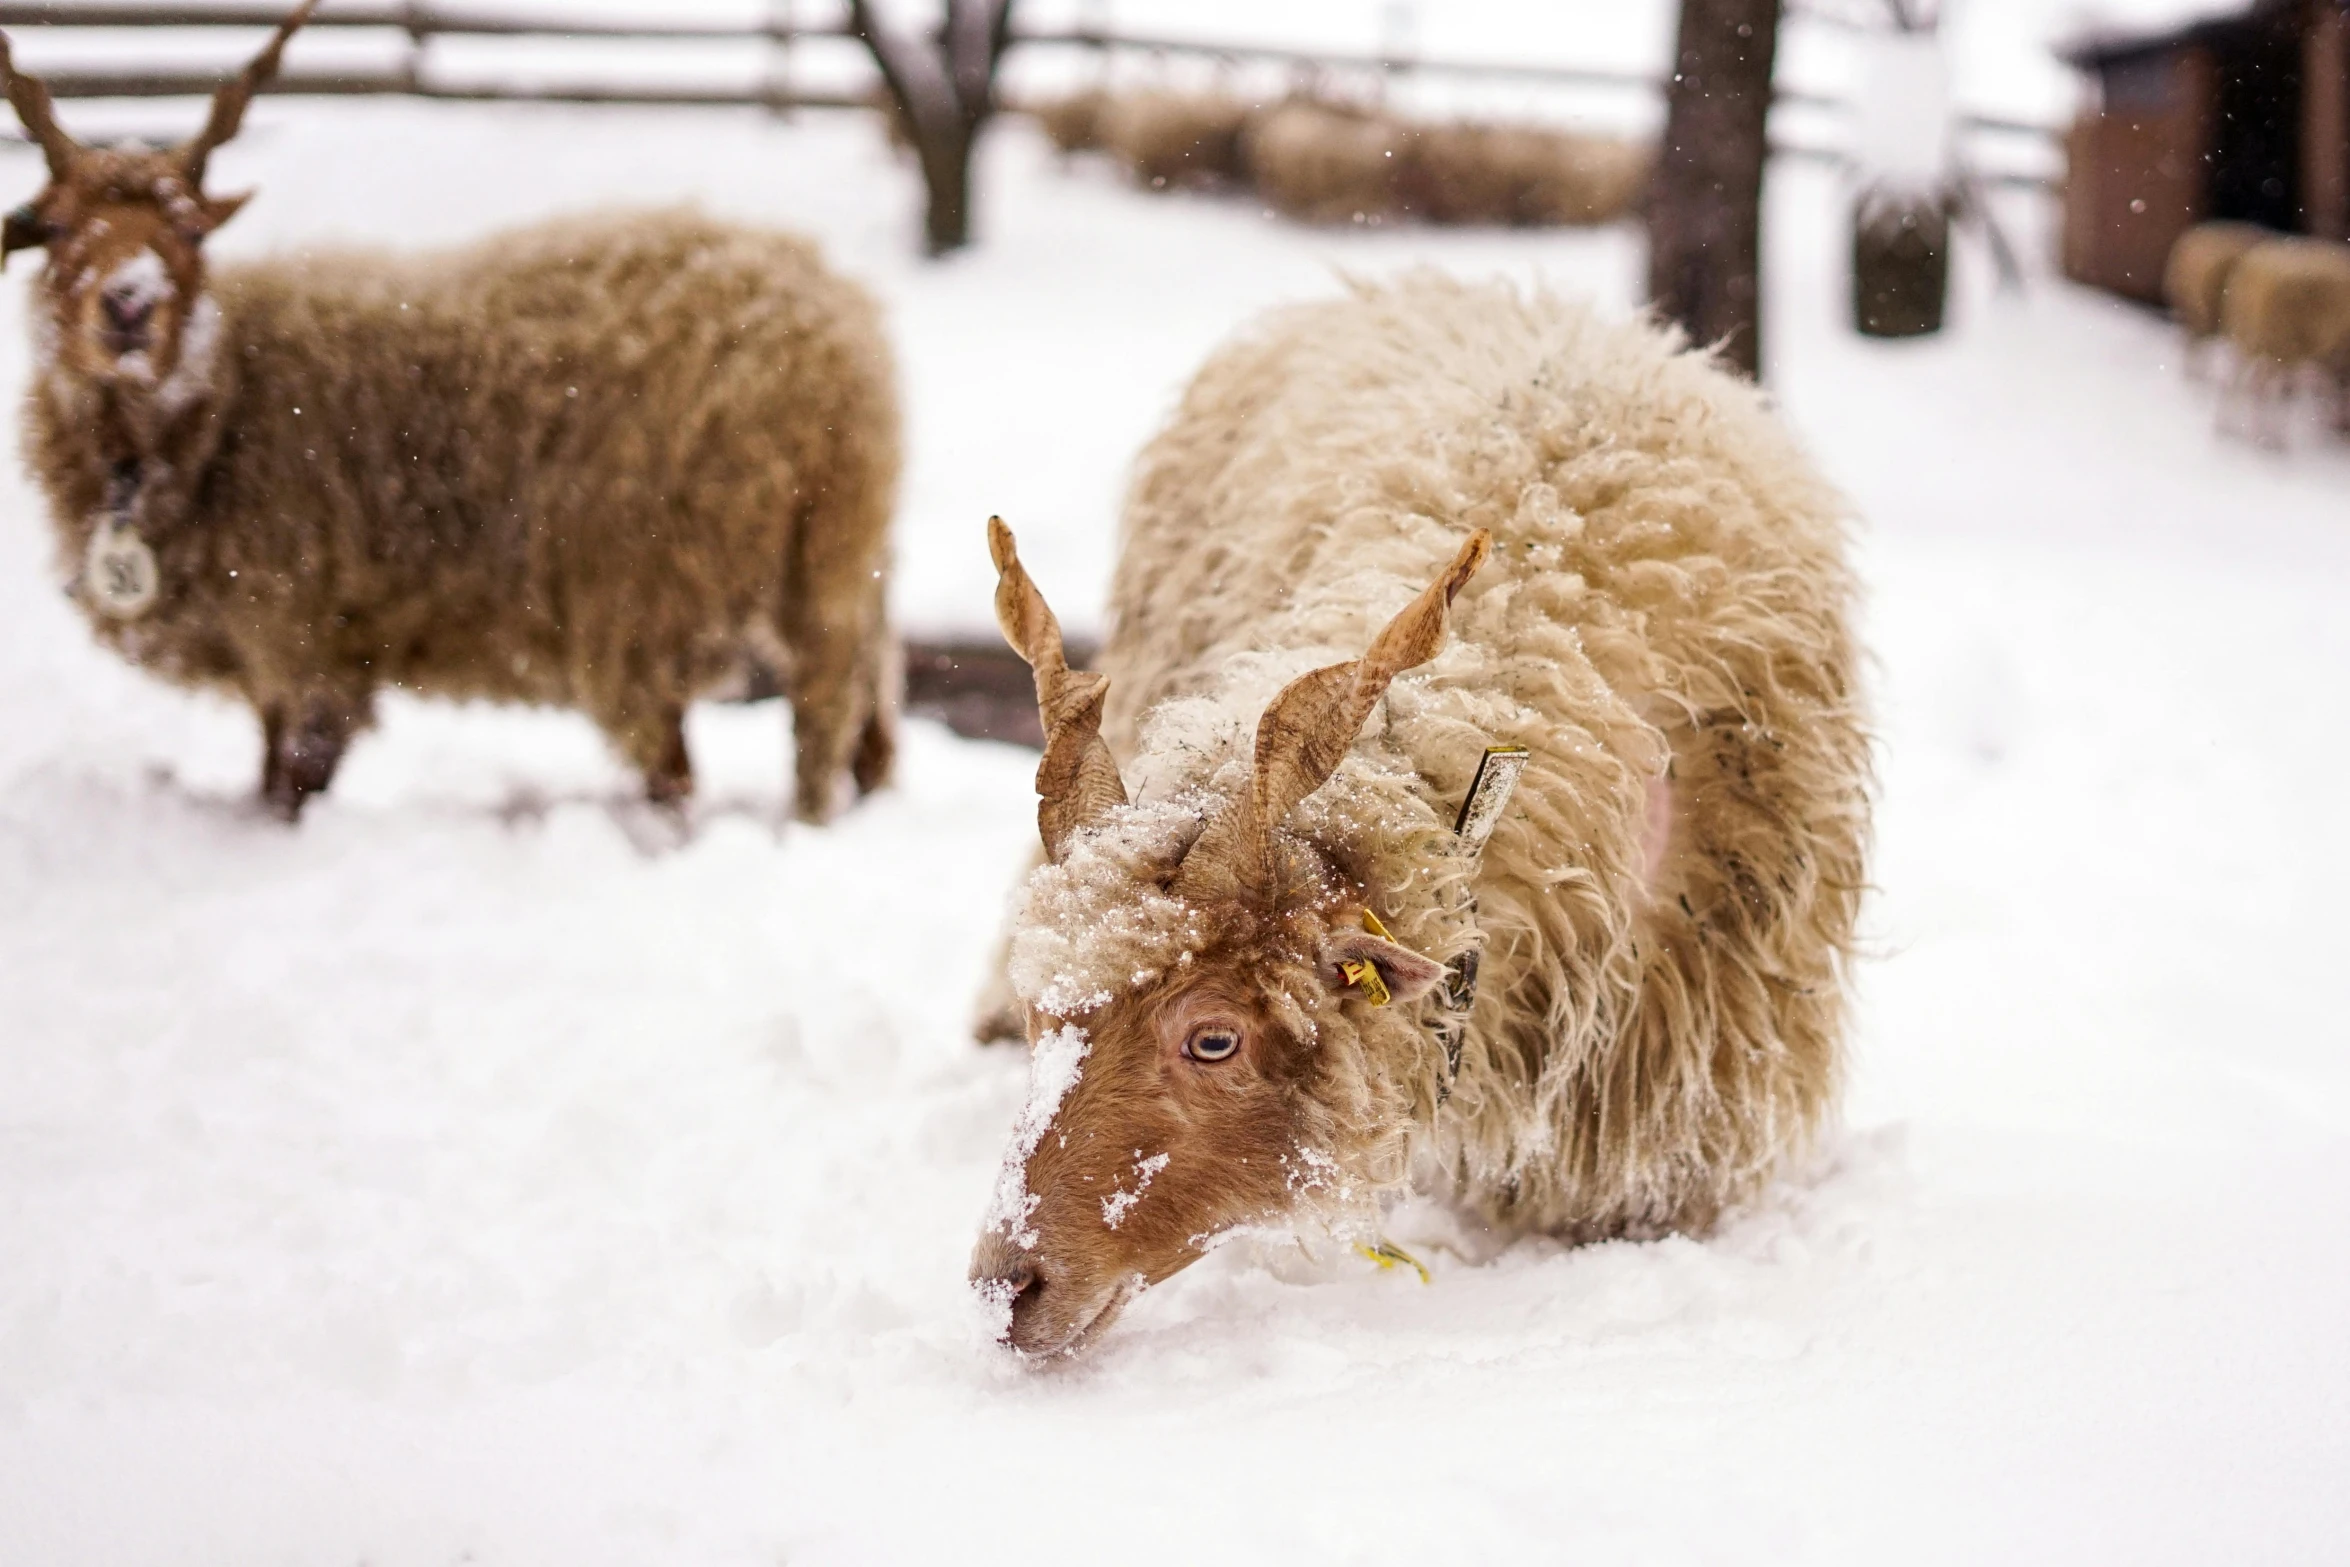 two woolly sheep on a snowy day by a fence